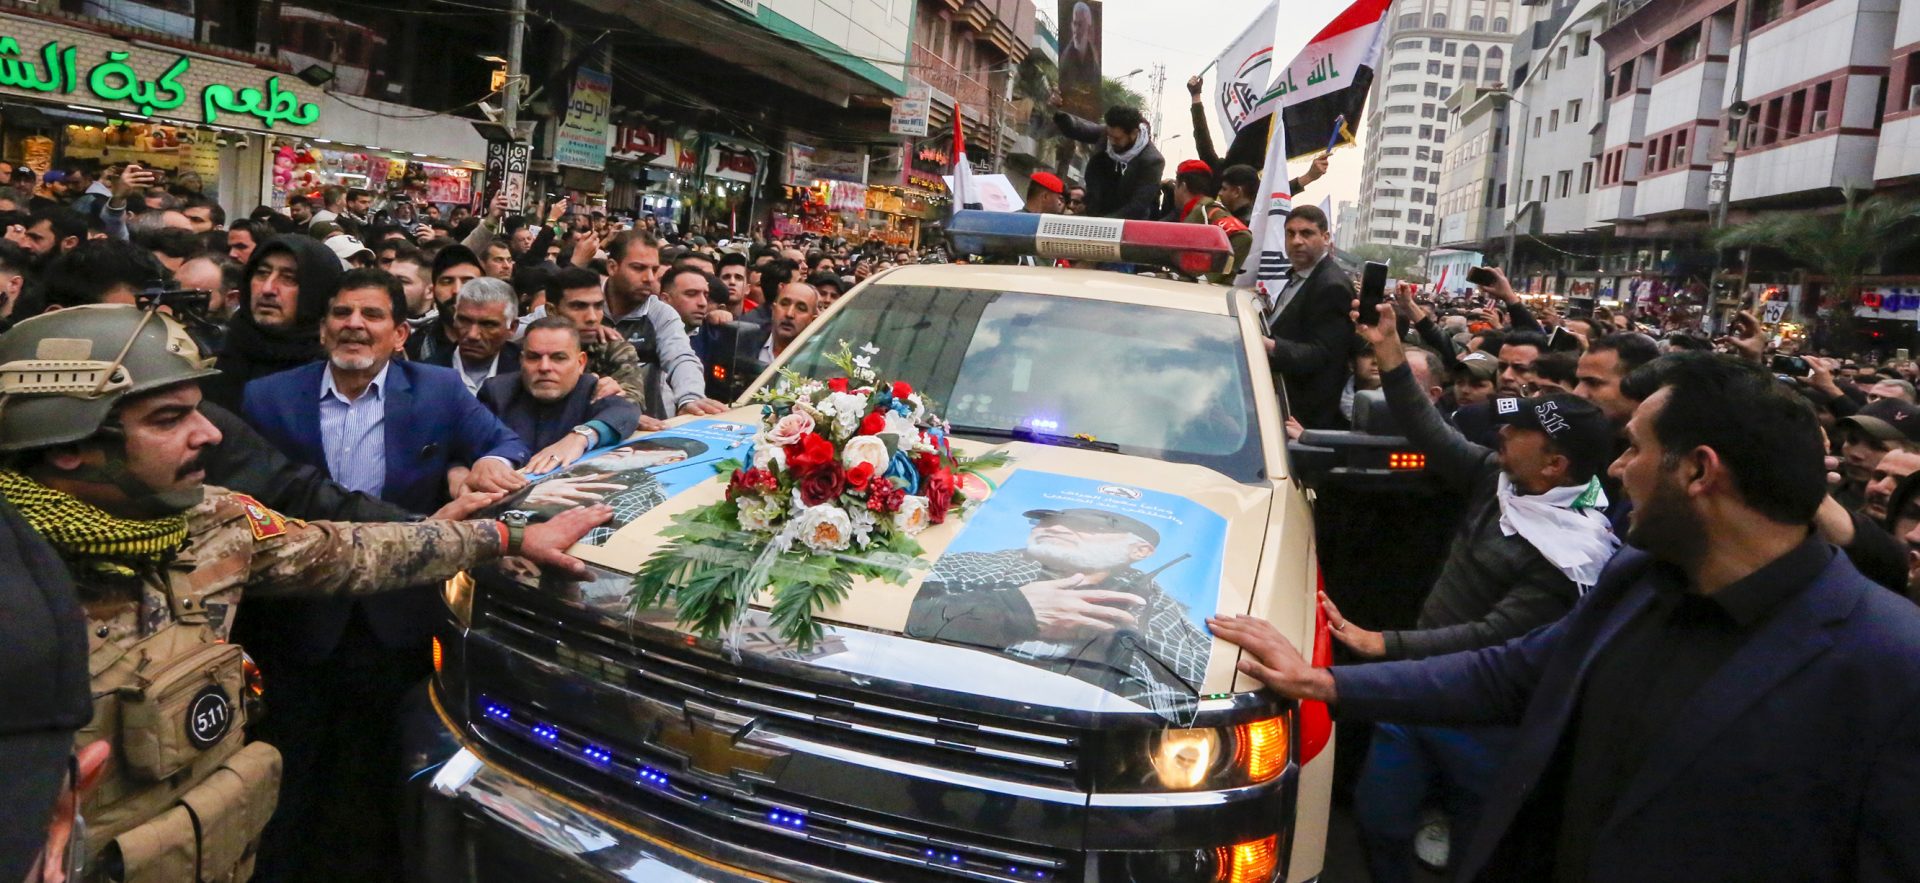 Mourners surround a vehicle carrying the coffins of Iranian Maj. Gen. Qassem Soleimani and Iraqi militia leader Abu Mahdi al-Muhandis, during a funeral procession Saturday in Baghdad.